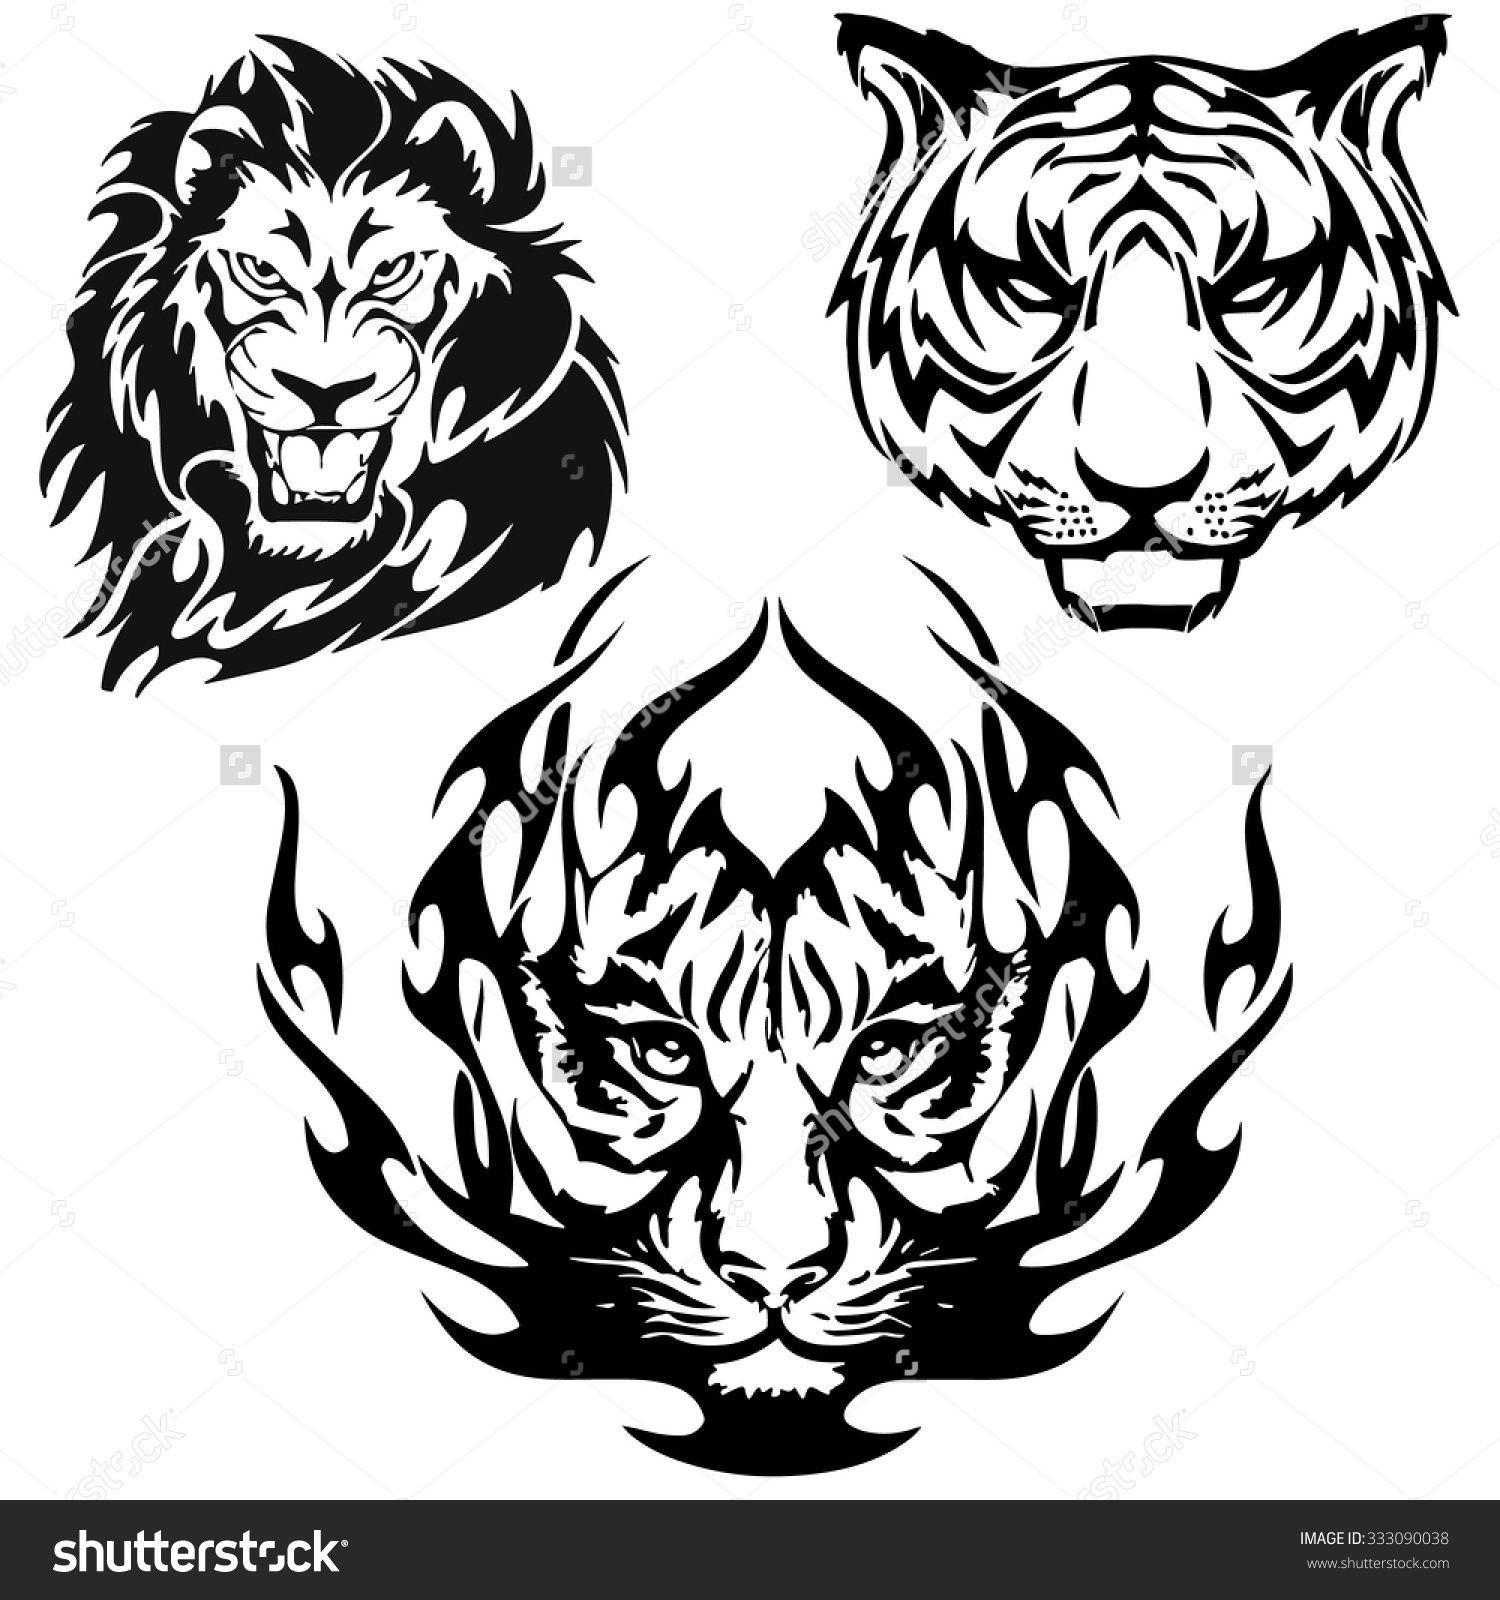 White Tiger Logo - A Lion and Tiger head logo in black and white. | Illustrations ...